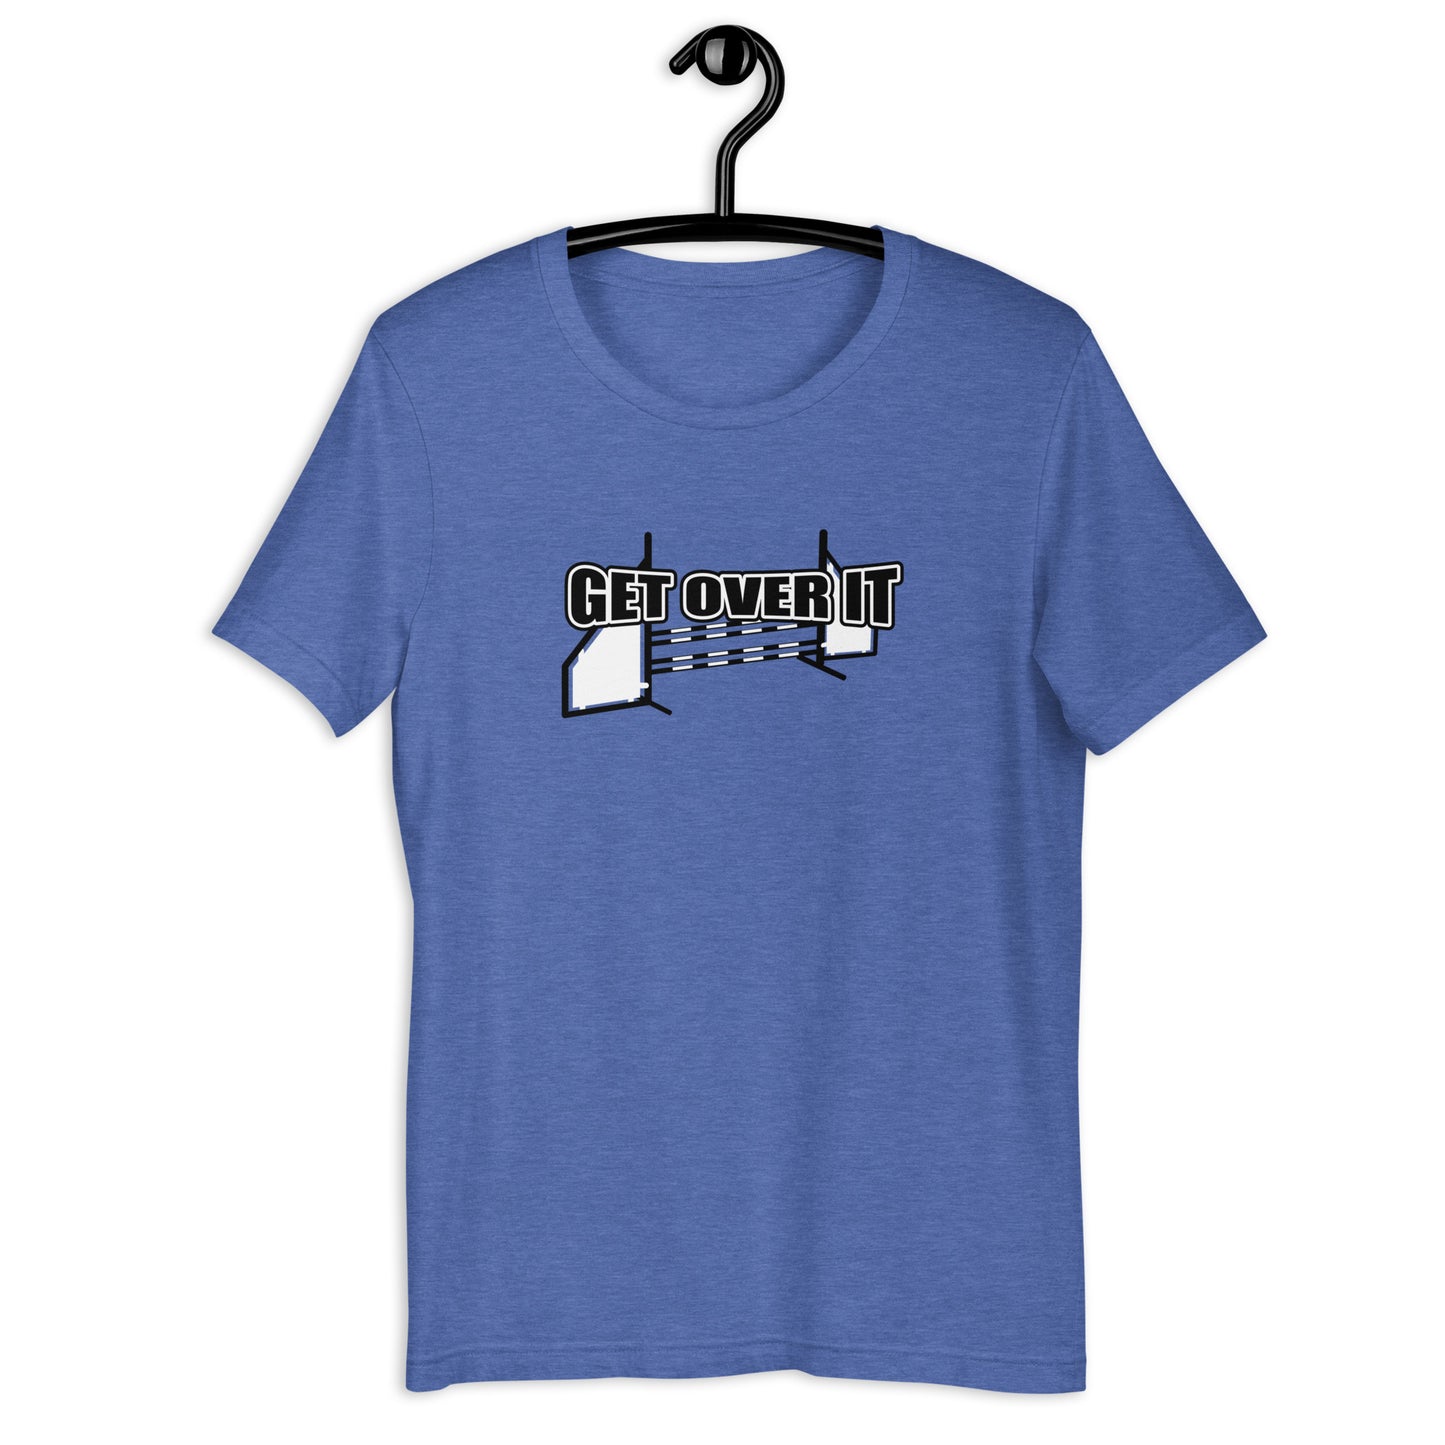 GET OVER IT - AGILITY Unisex t-shirt